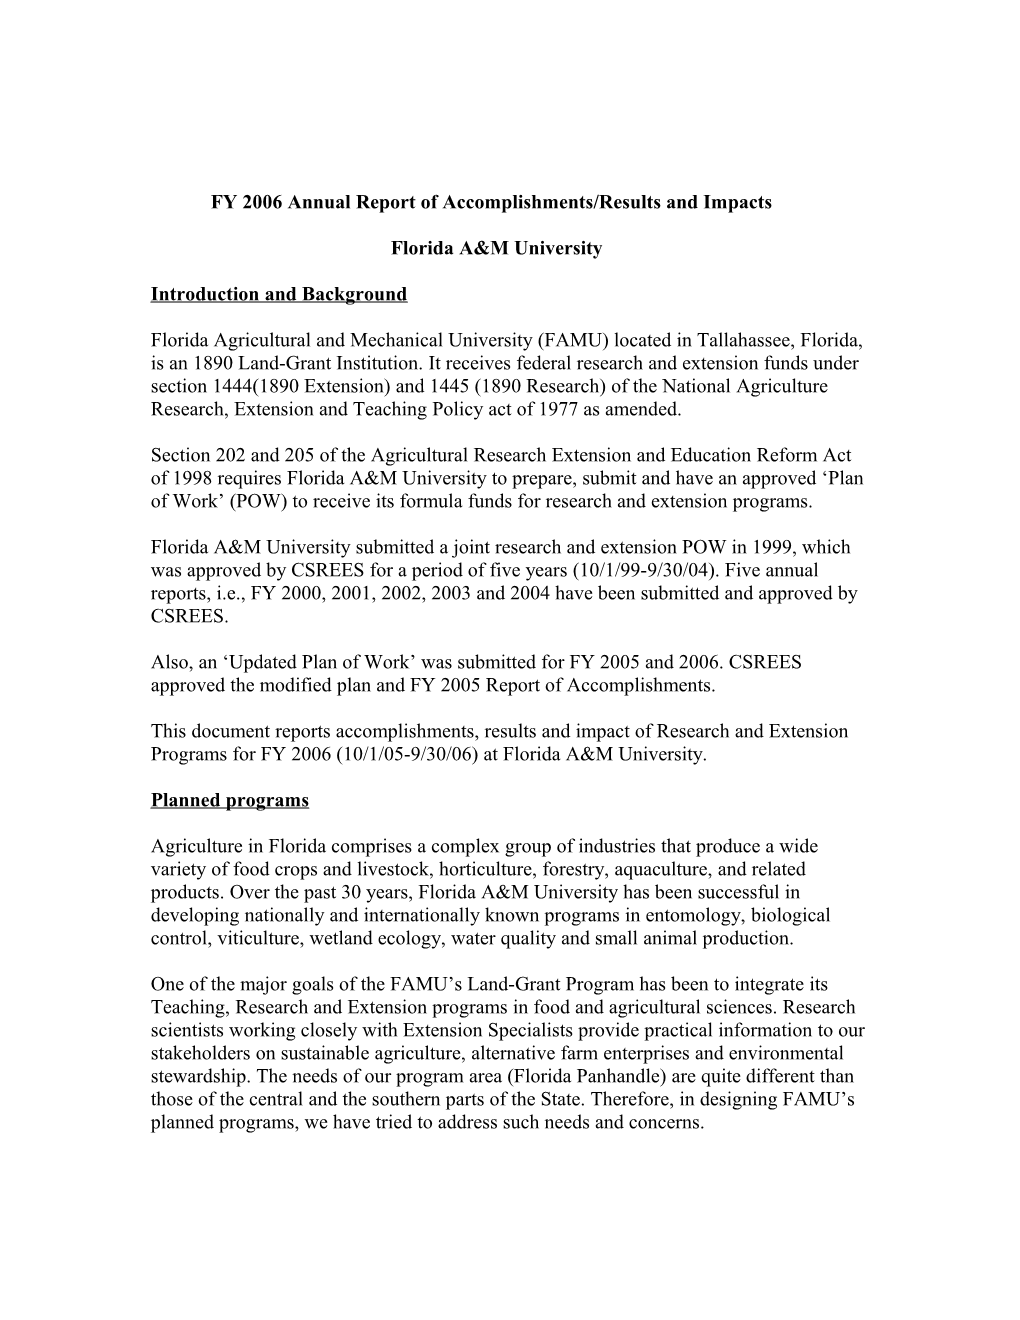 FY 2004 Annual Report of Accomplishments/Results and Impact